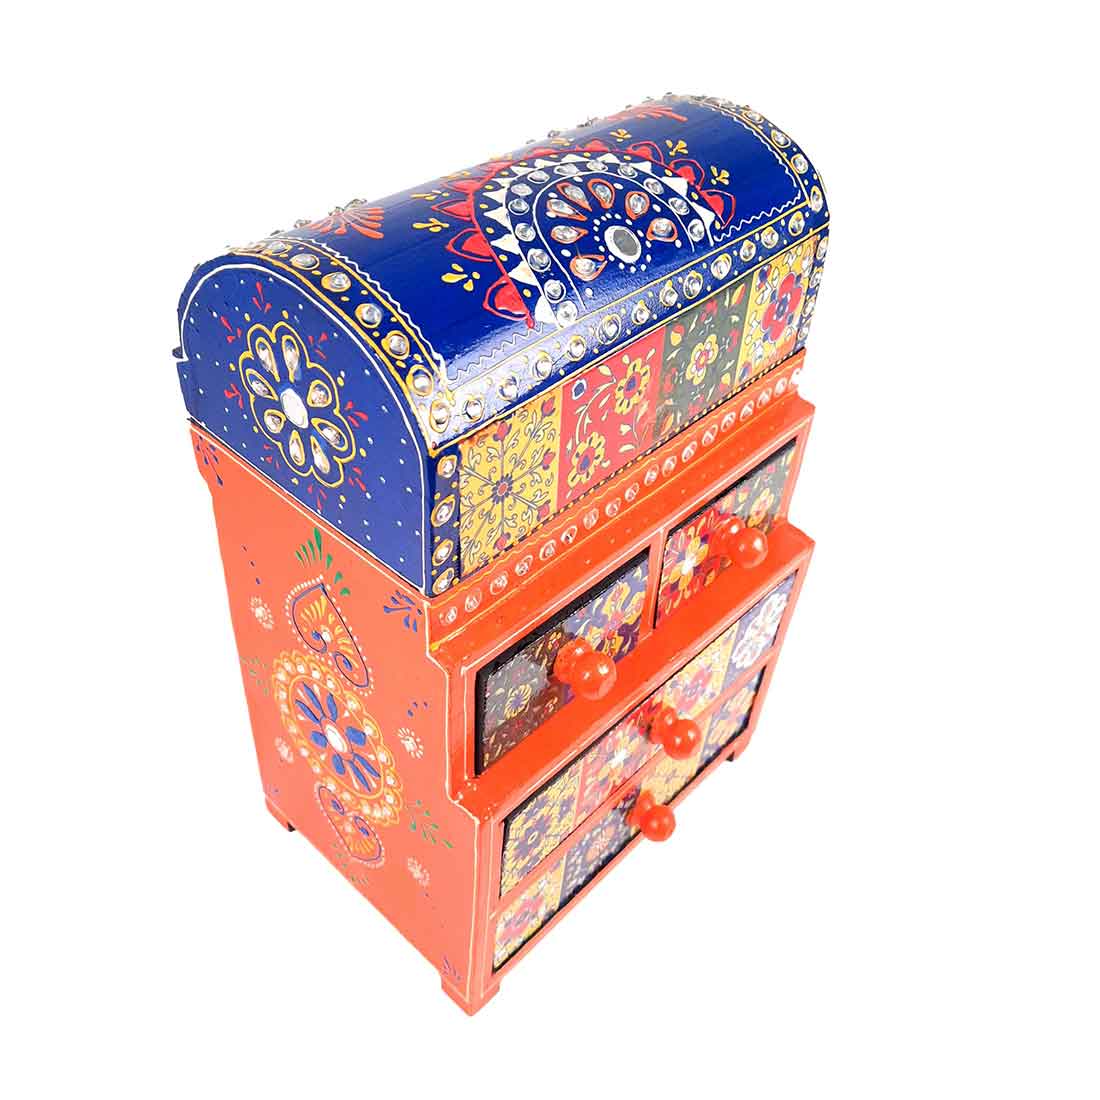 Jewelry Box Wooden | Jewellery Organizer | Multipurpose Storage Box - for Home Decor & Gifts - 13 Inch